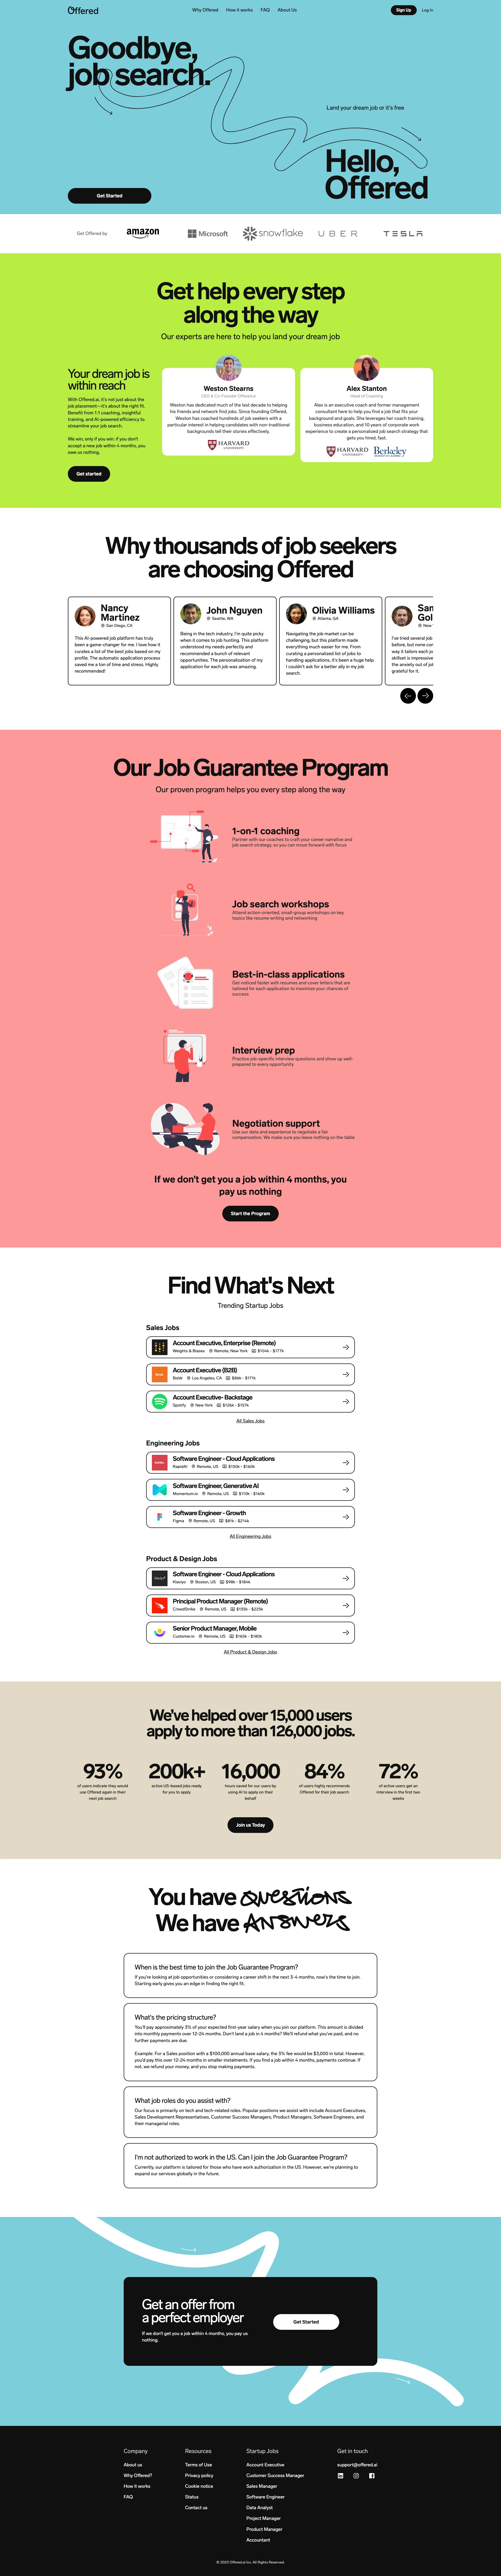 Offered Landing Page Example: Use AI to find a new job with easy. We handle all the automation so you can focus on the interviewing.